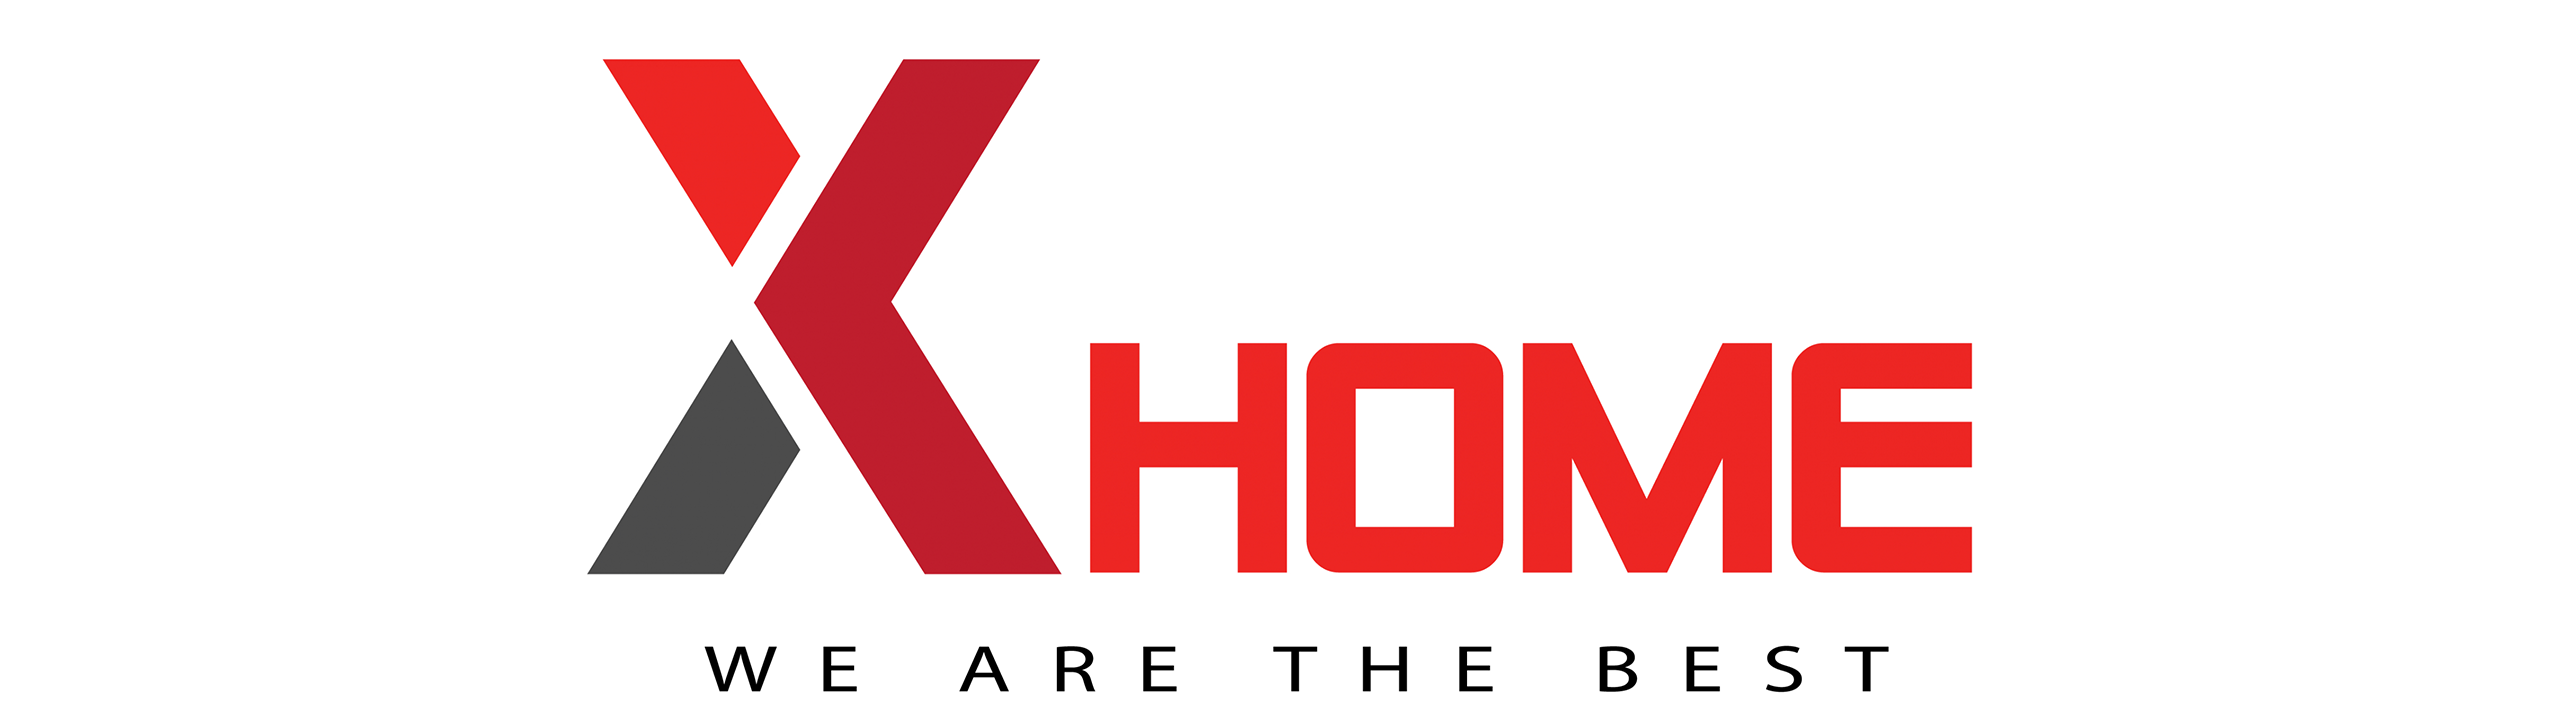 XHOME Group